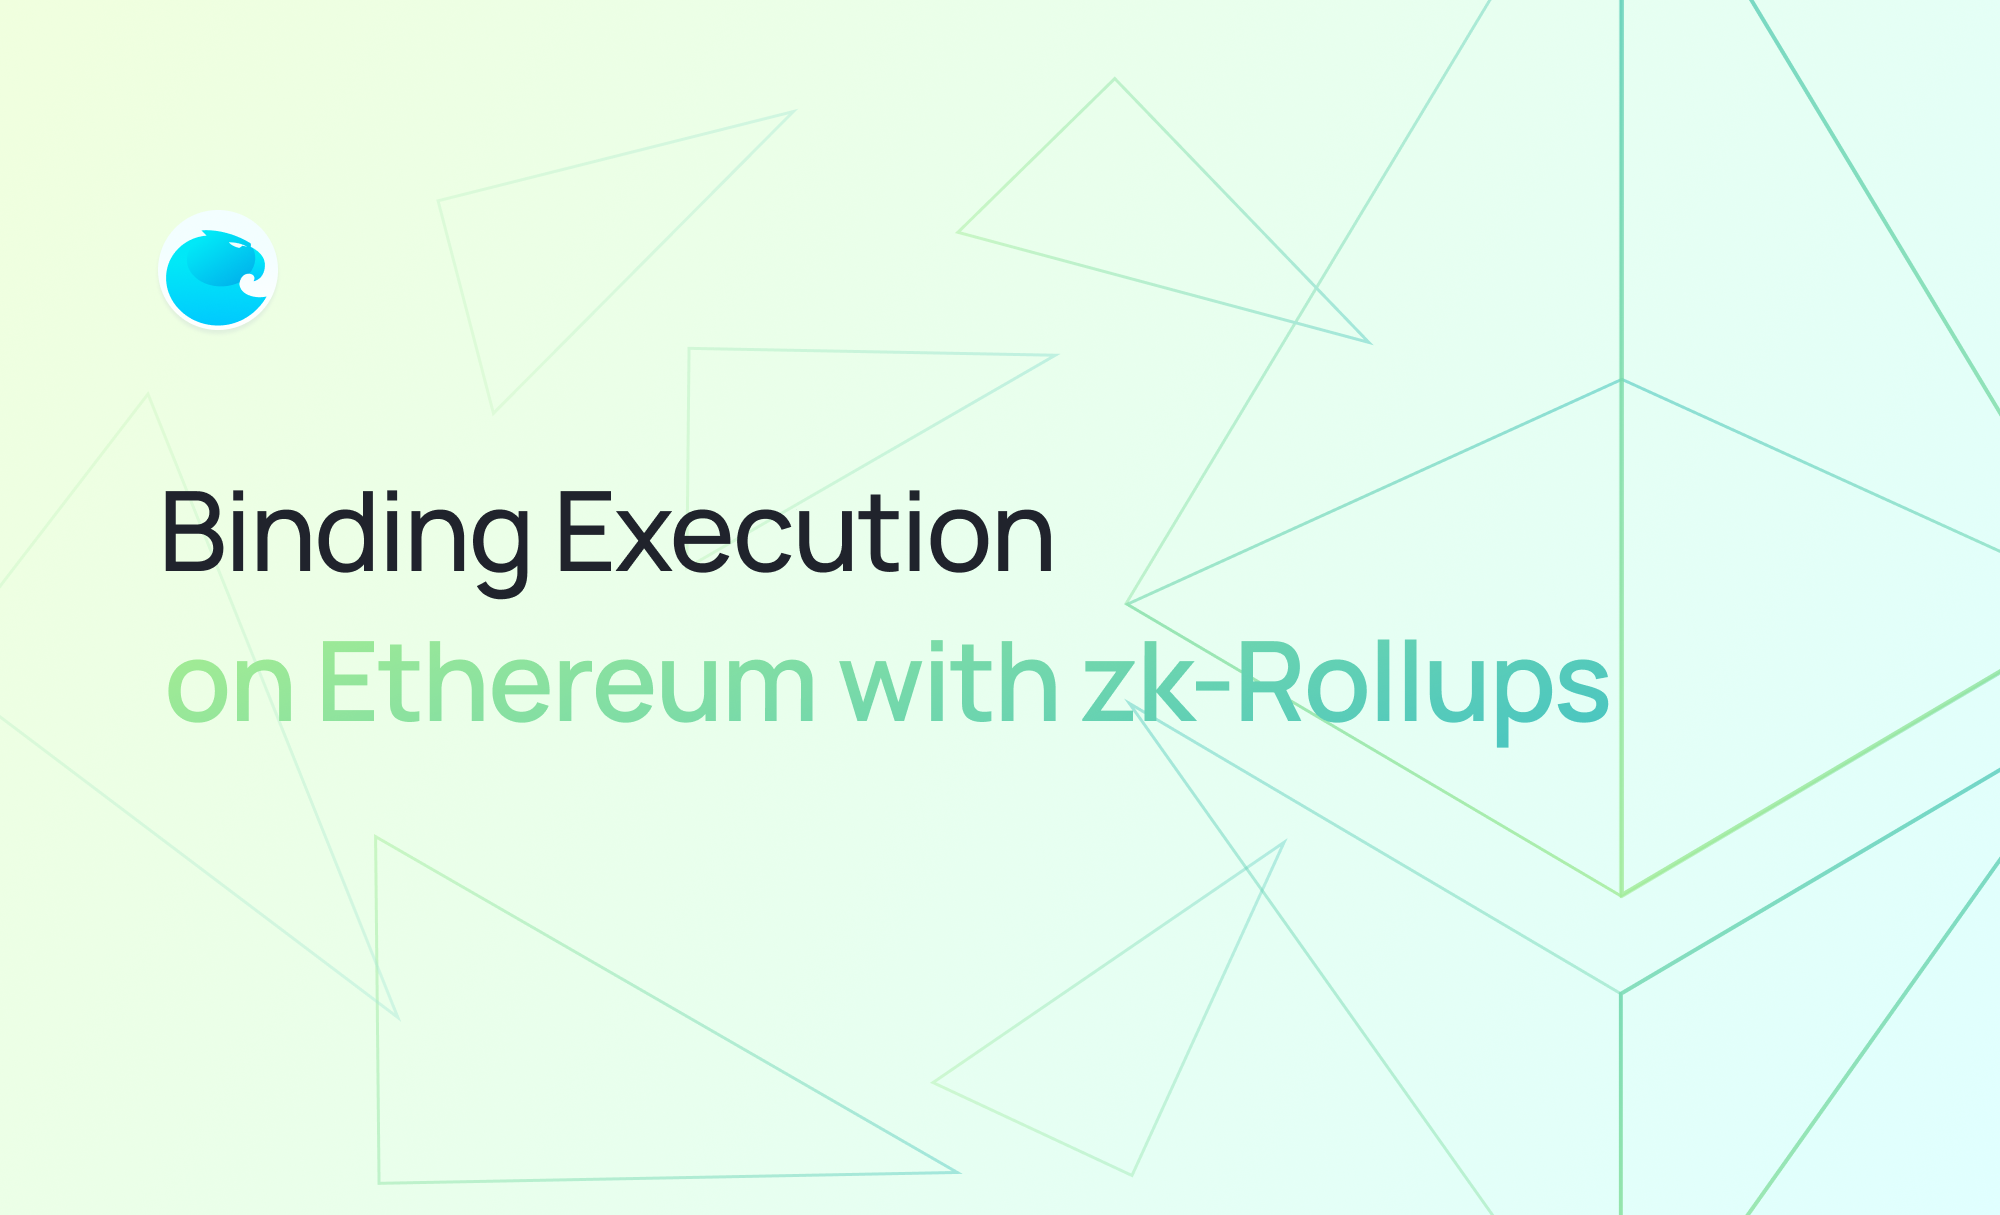 Binding Execution on Ethereum with zk-Rollups